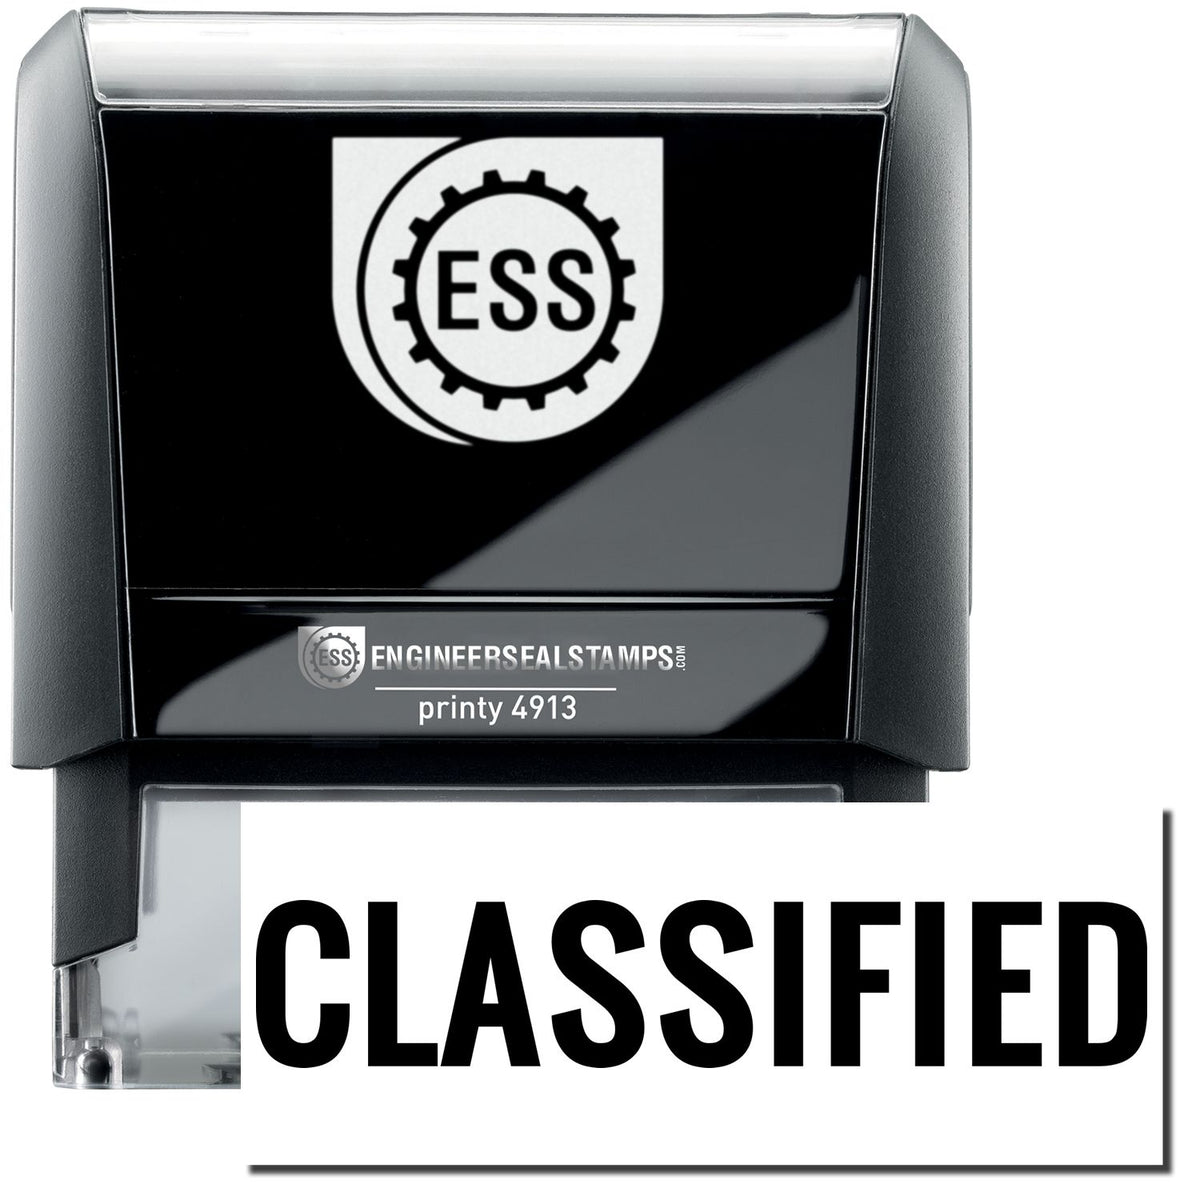 A self-inking stamp with a stamped image showing how the text &quot;CLASSIFIED&quot; in a large font is displayed by it after stamping.